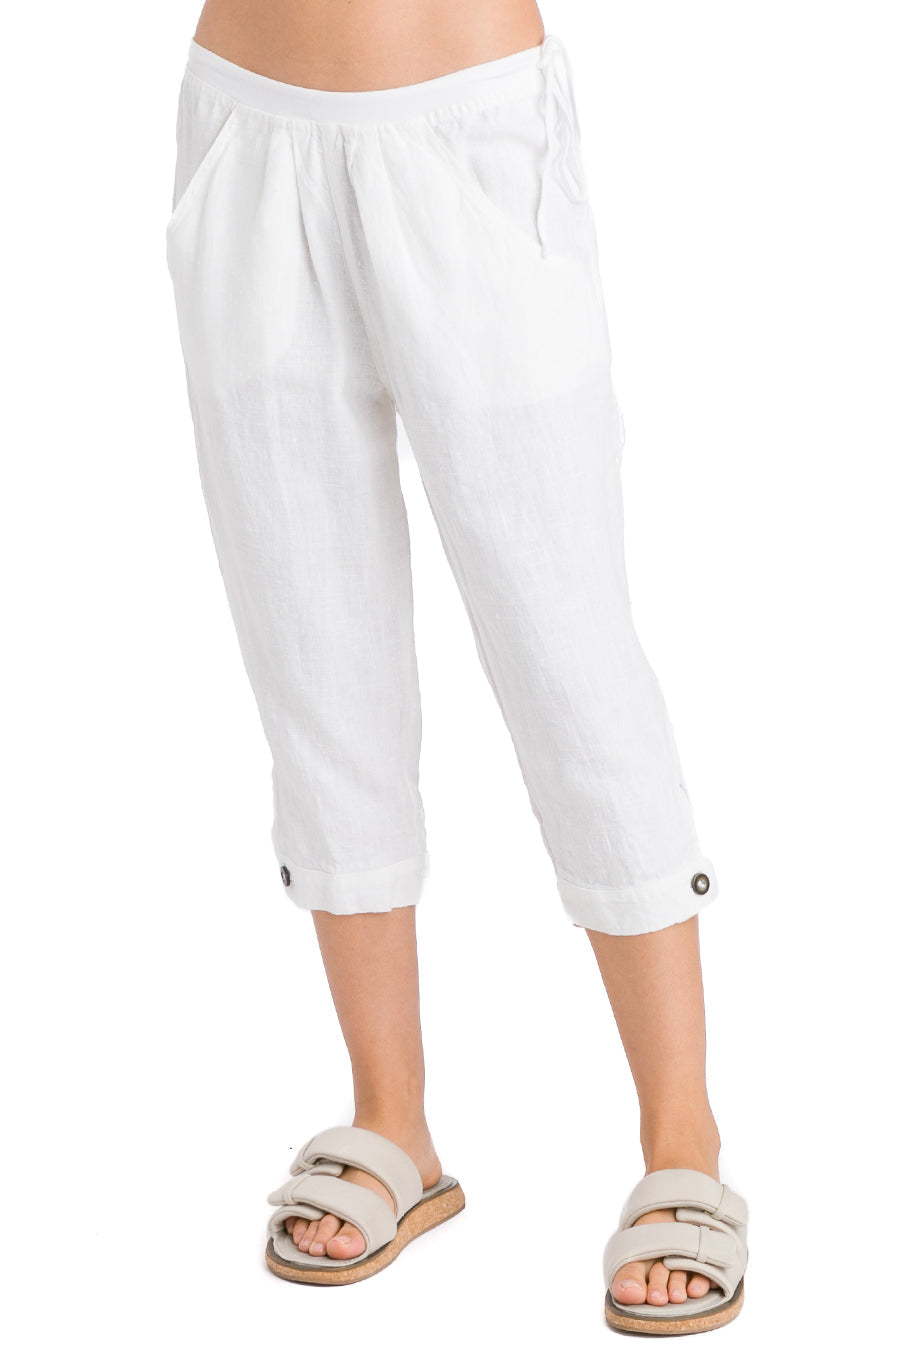 Hard Tail Forever Heavy Linen Side Tie Rider Crop Pants - White